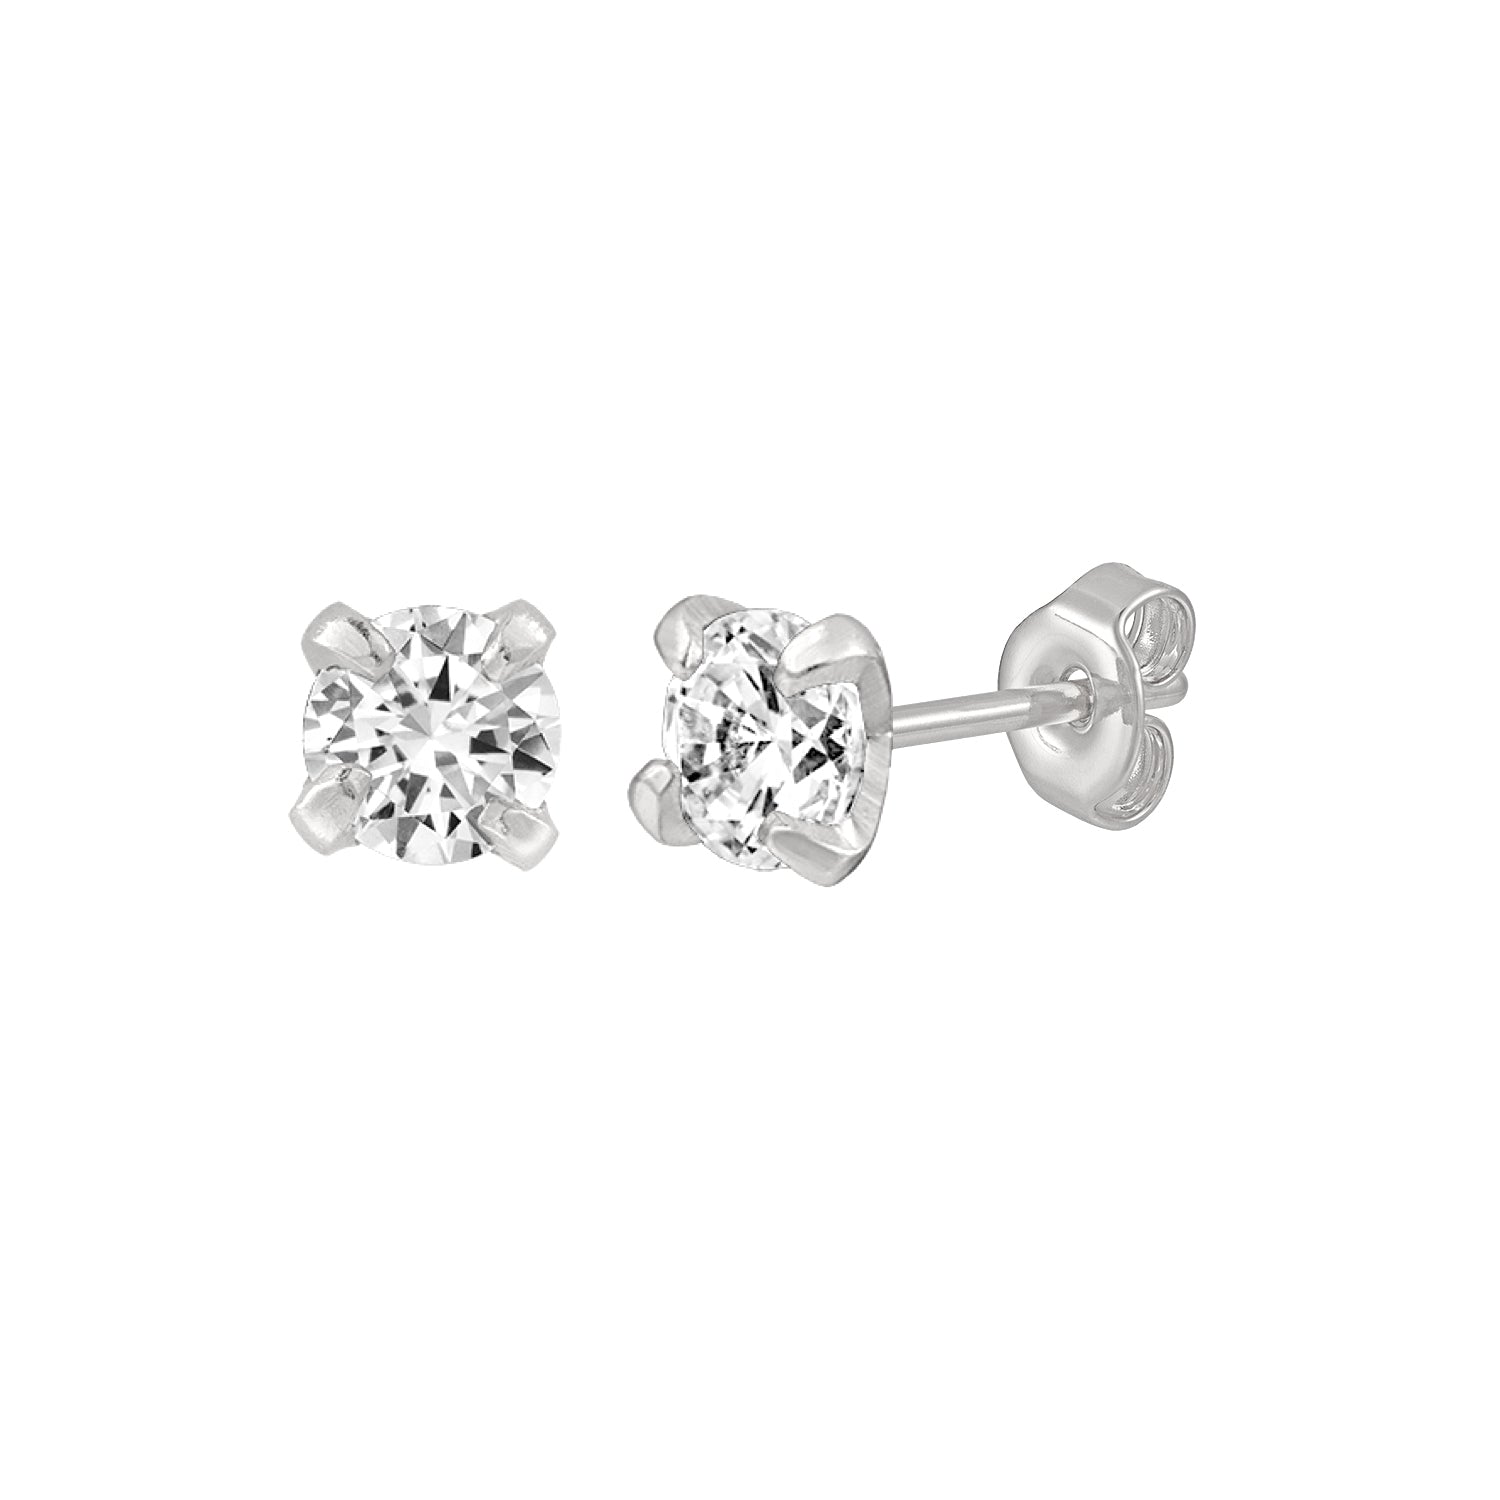 J&CO Jewellery Sparkly Stud Earrings 5mm Gold